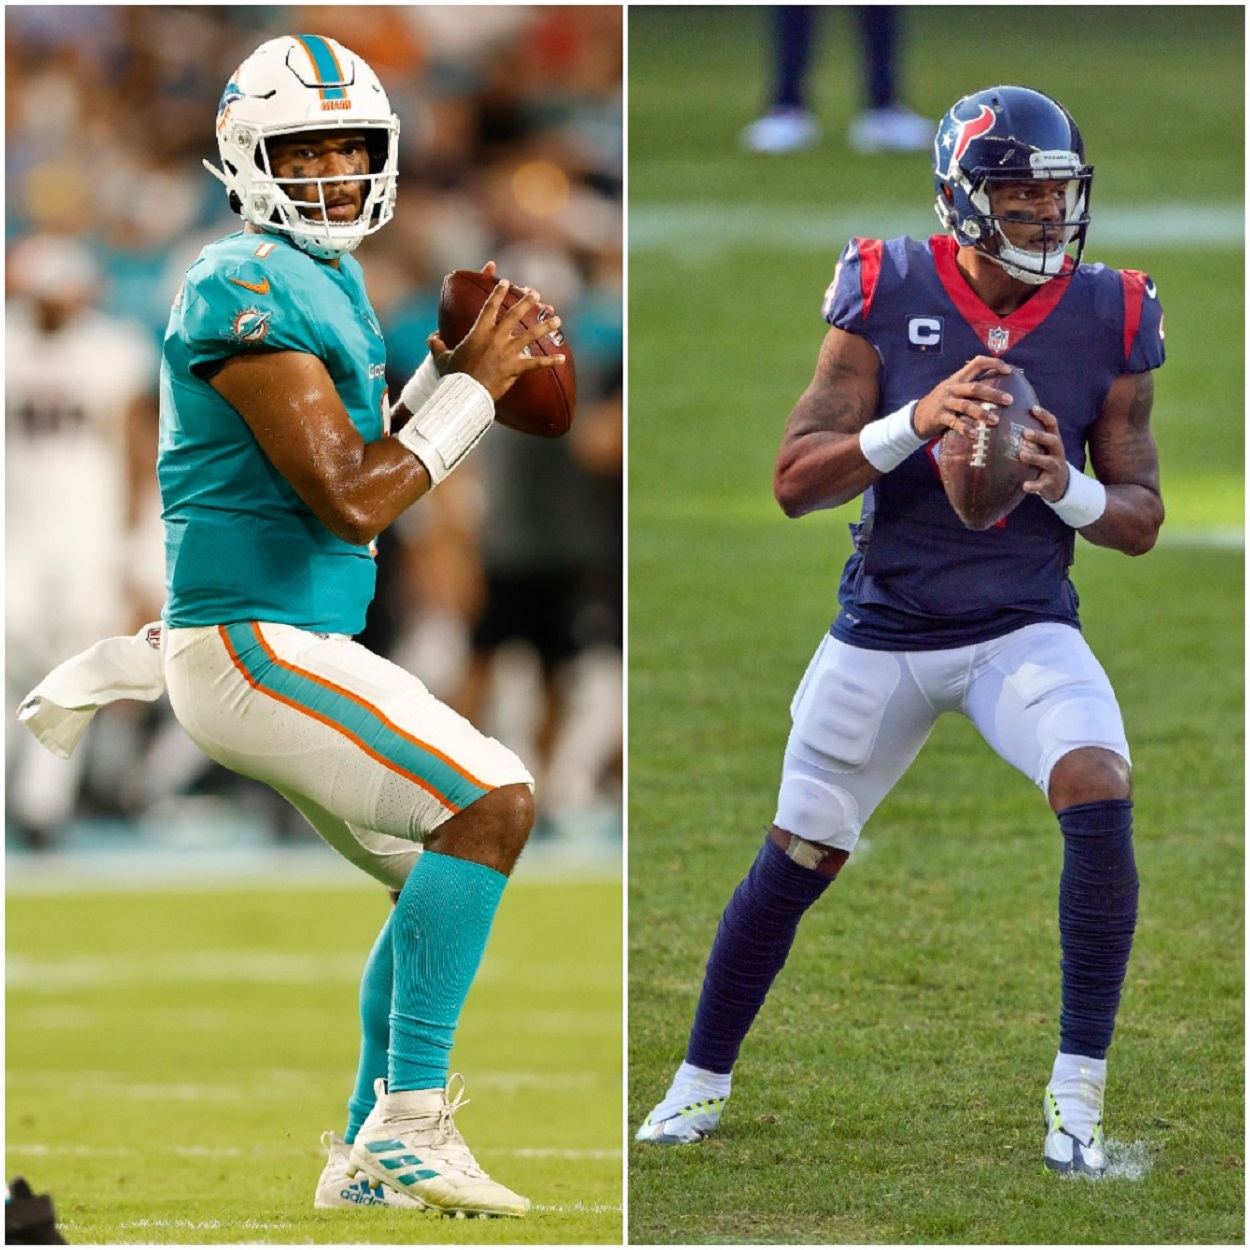 Dolphins Head Coach Brian Flores Doesn’t Mince Words When Discussing Tua Tagovailoa’s Future in Miami As Deshaun Watson Rumors Continue to Swirl